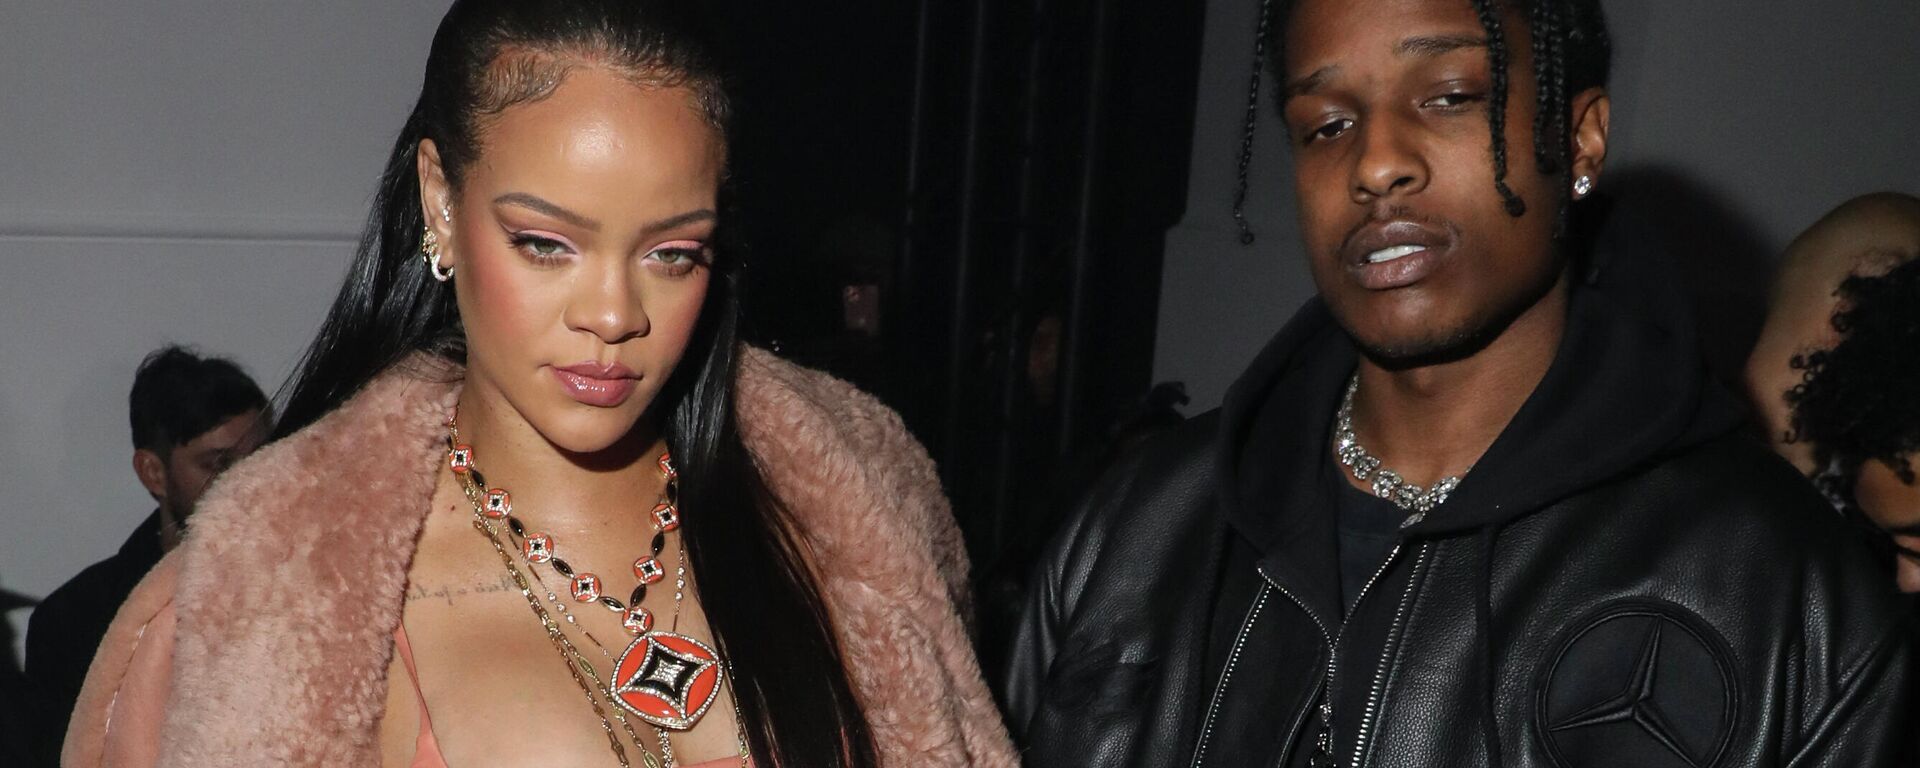 Rihanna, left, and ASAP Rocky arrive for the Off-White Ready To Wear Fall/Winter 2022-2023 fashion collection, unveiled during the Fashion Week in Paris, Monday, Feb. 28, 2022.  - Sputnik International, 1920, 20.05.2022